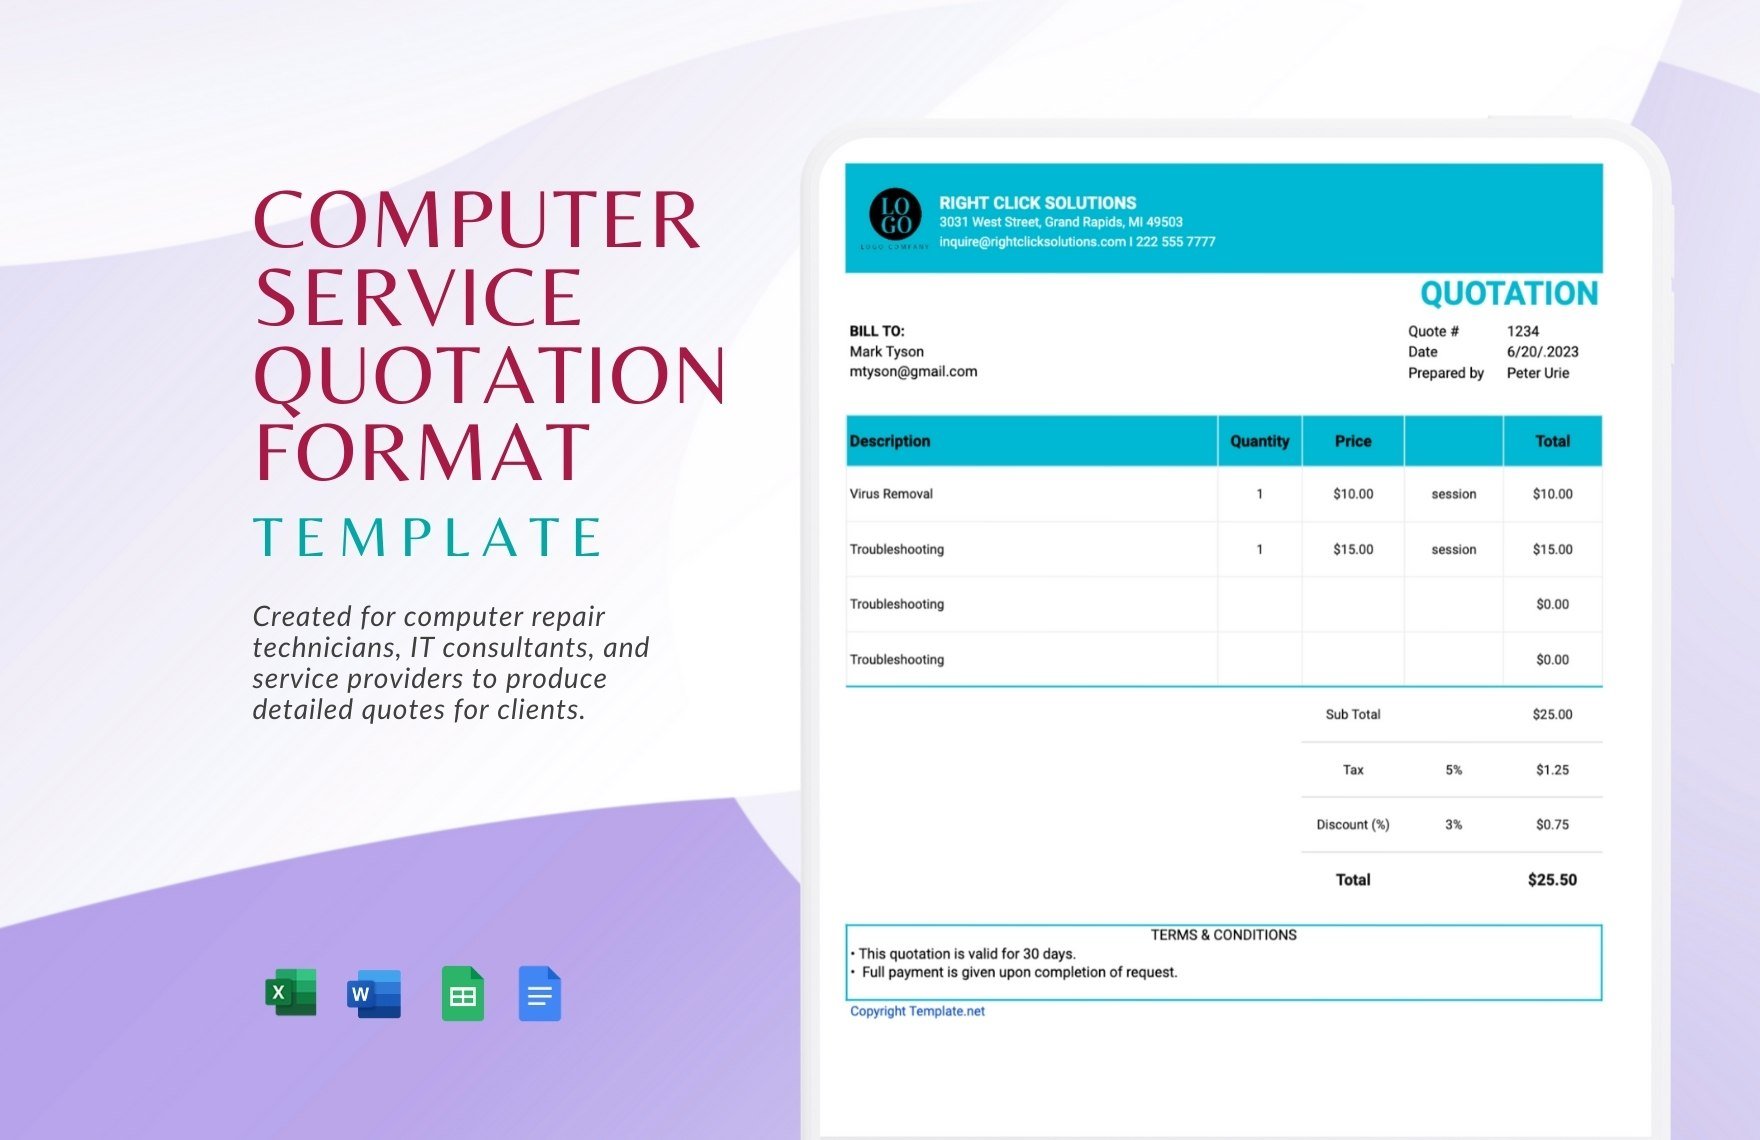 Computer Service Quotation Format Template in Word, Google Docs, Excel, Google Sheets